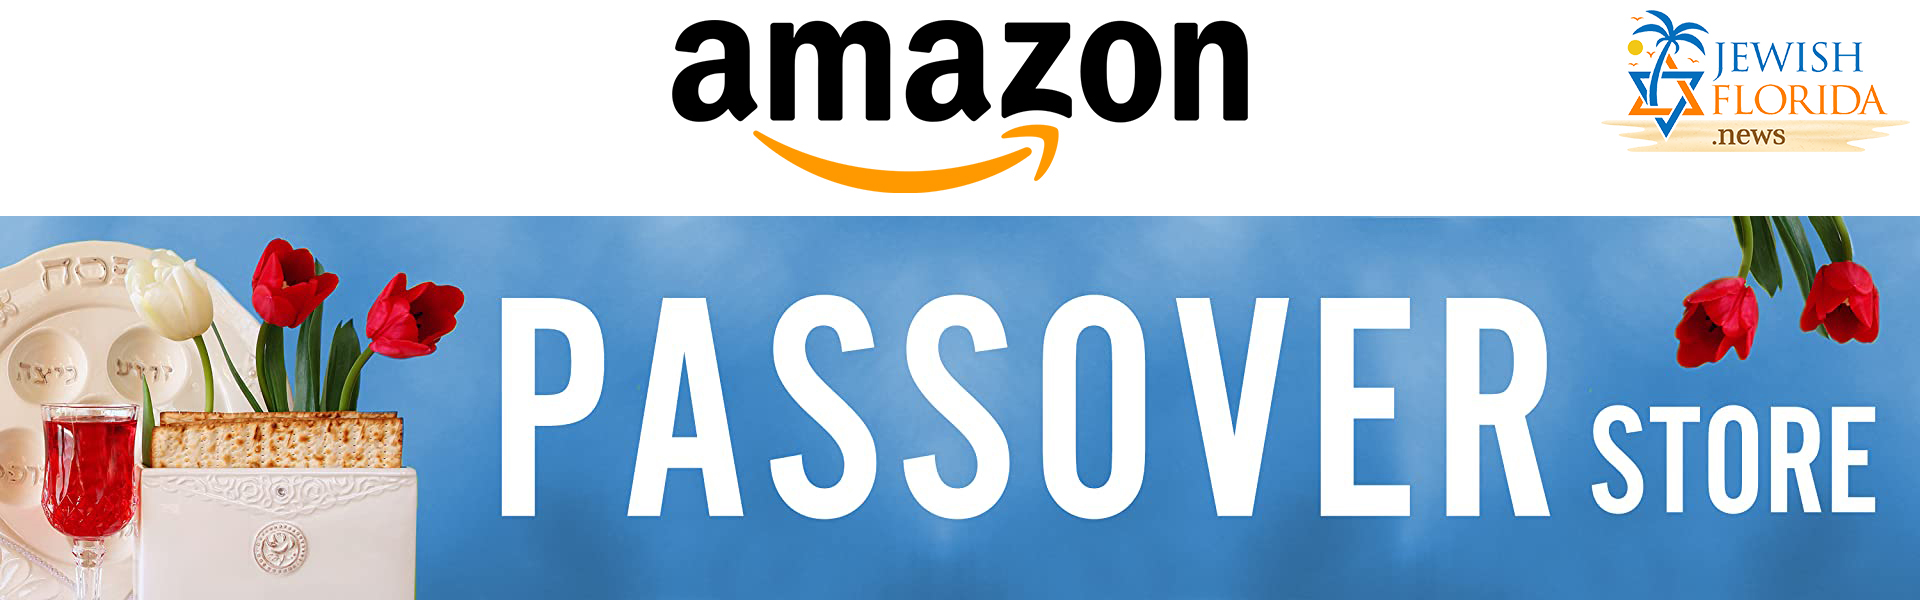 Amazon Opens Pesach Store